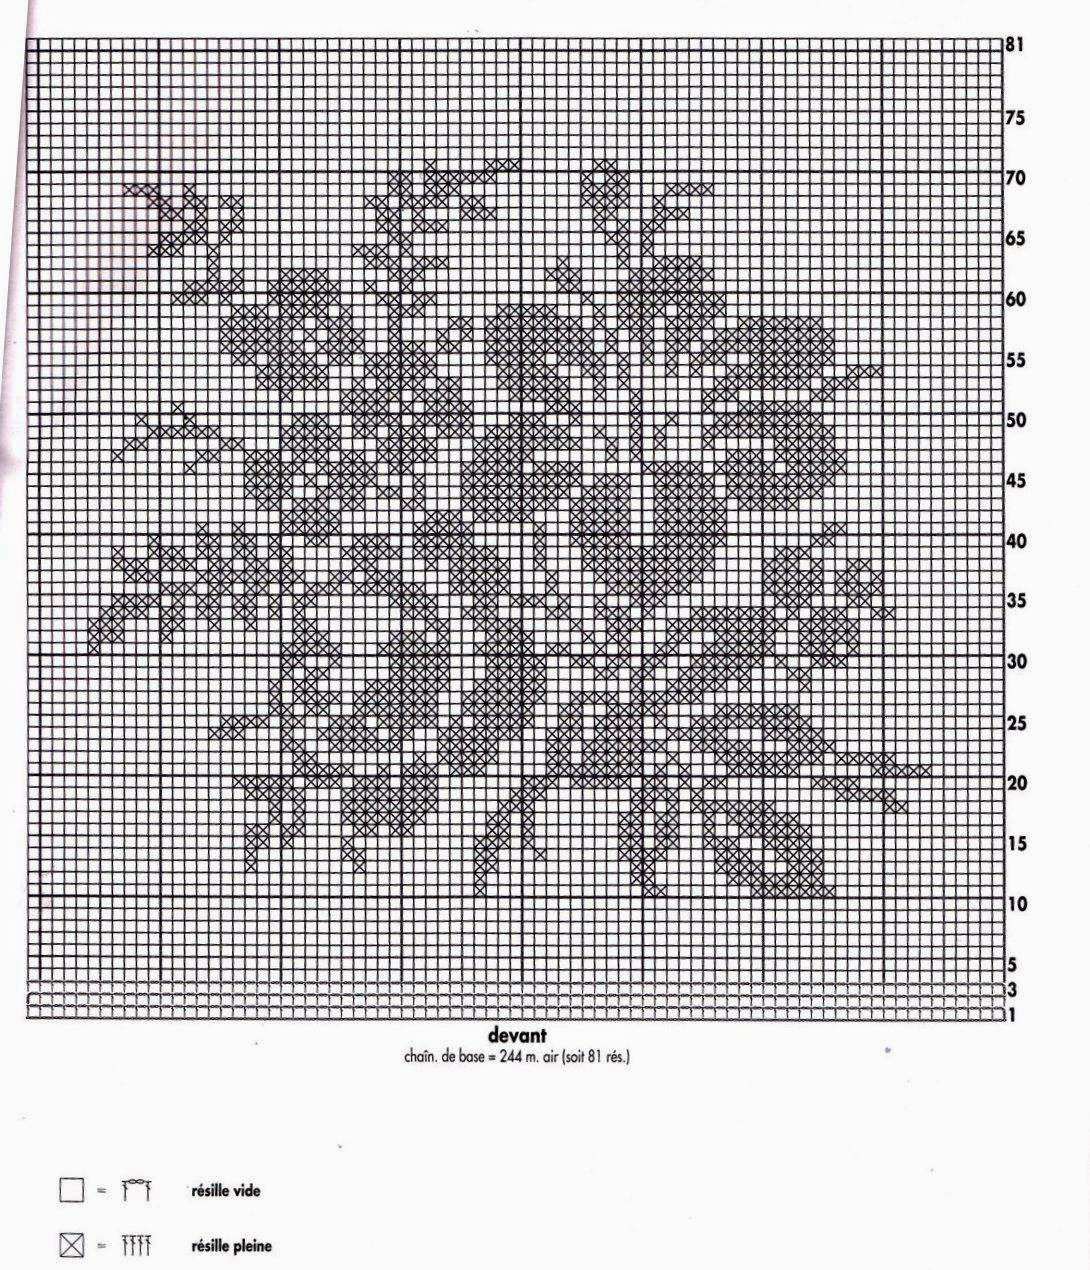 Filet square doily free pattern download with bunch of flowers